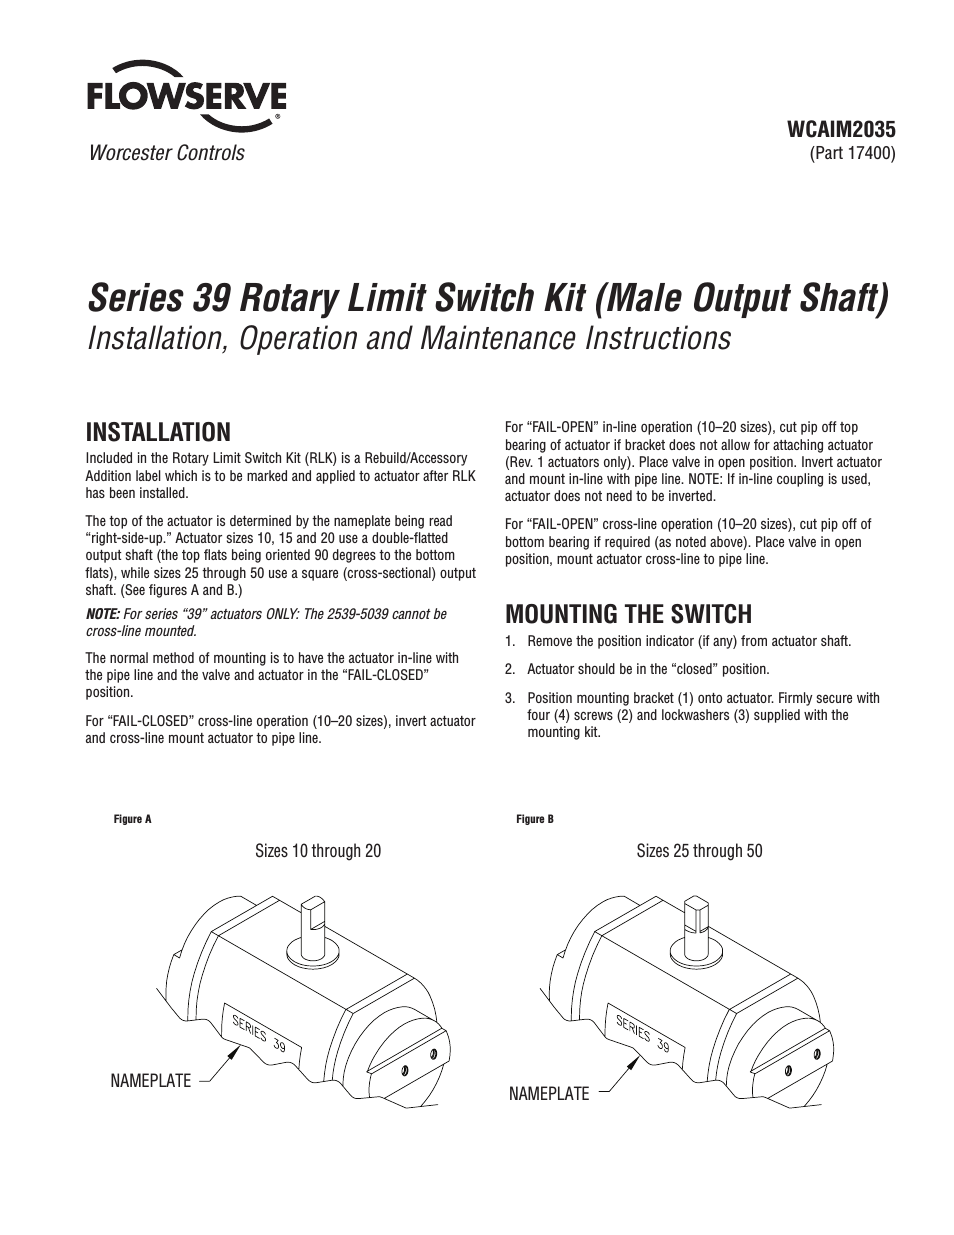 39 Series Rotary Limit Switch Kit